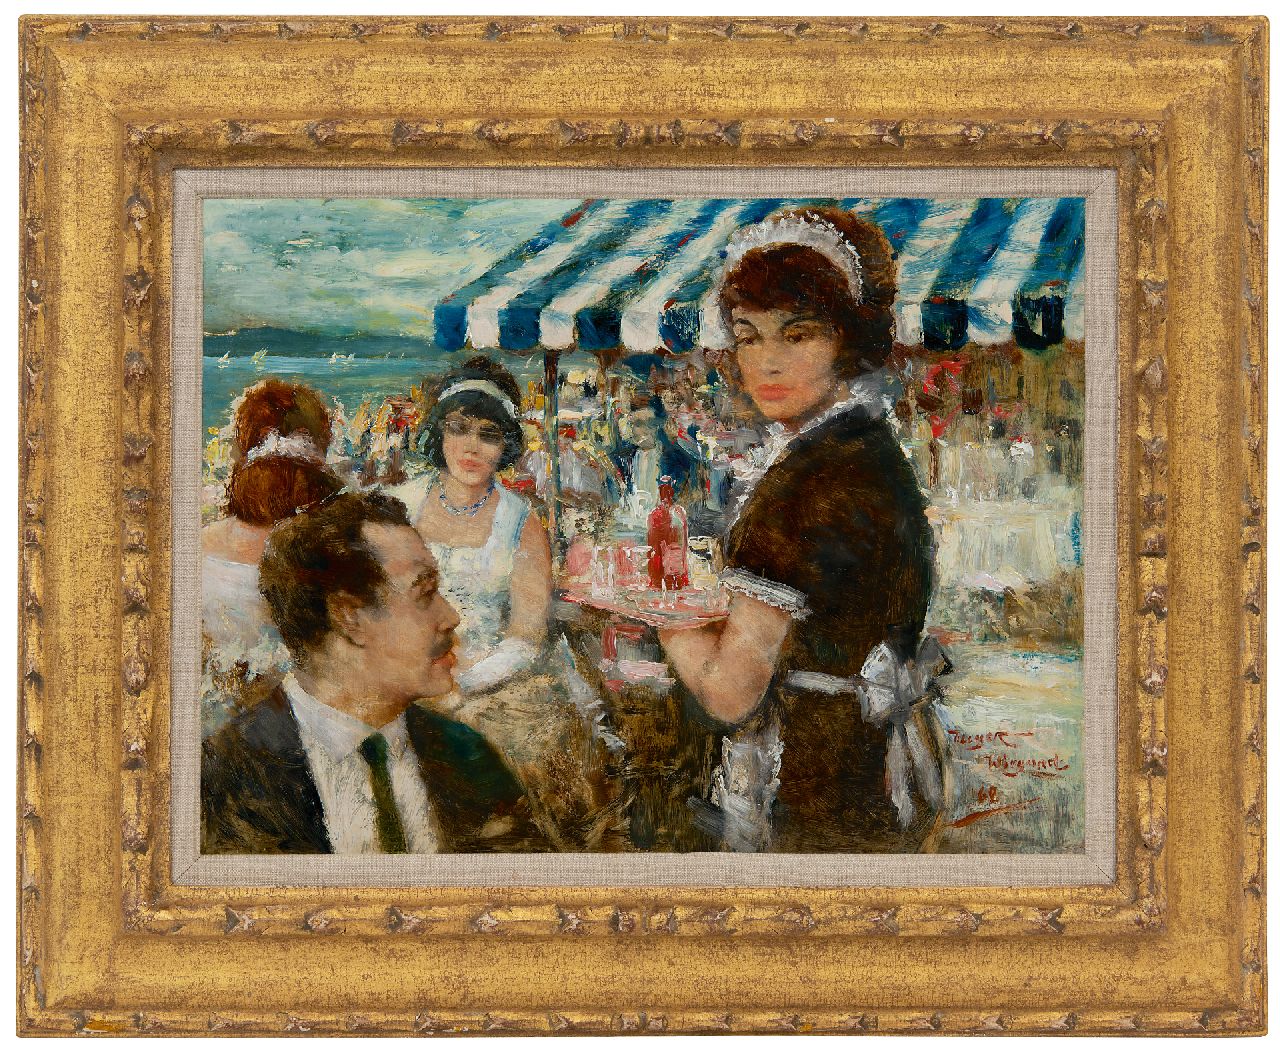 Meyer-Wiegand R.D.  | Rolf Dieter Meyer-Wiegand, Terrace by the beach, oil on panel 30.2 x 40.1 cm, signed l.r. and dated '62